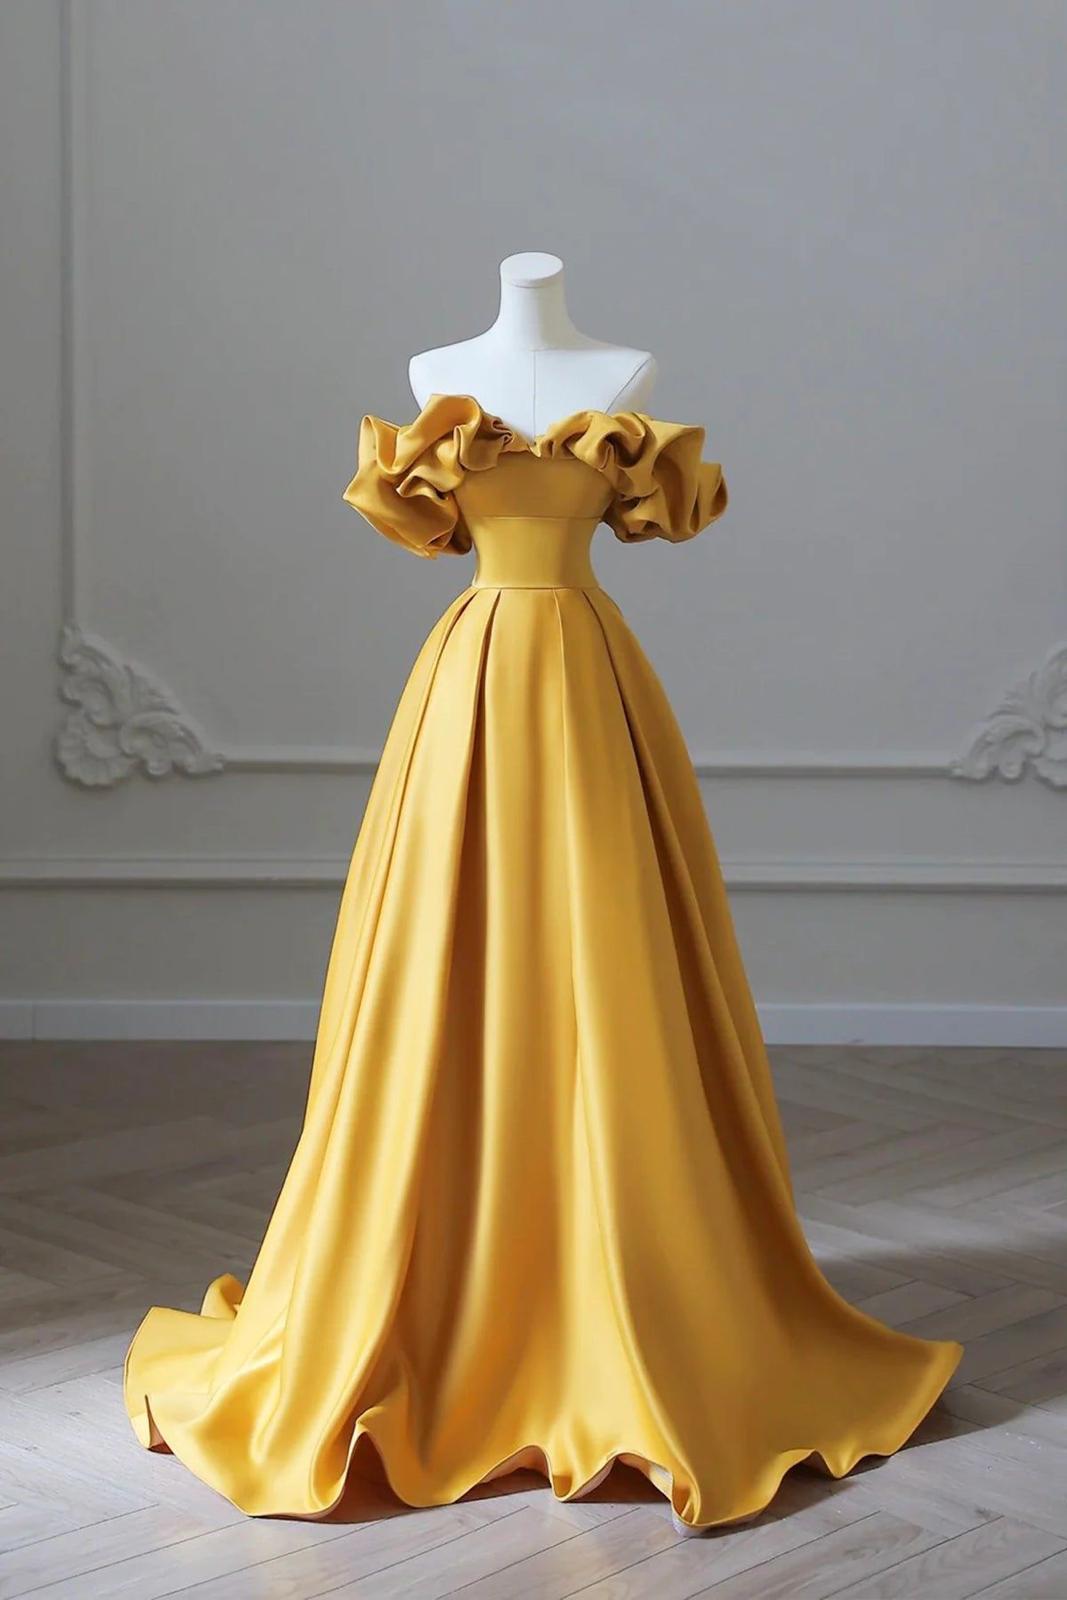 Gold Satin Prom Dresses Off the Shoulder Ball Gown Corset Back FD2623B